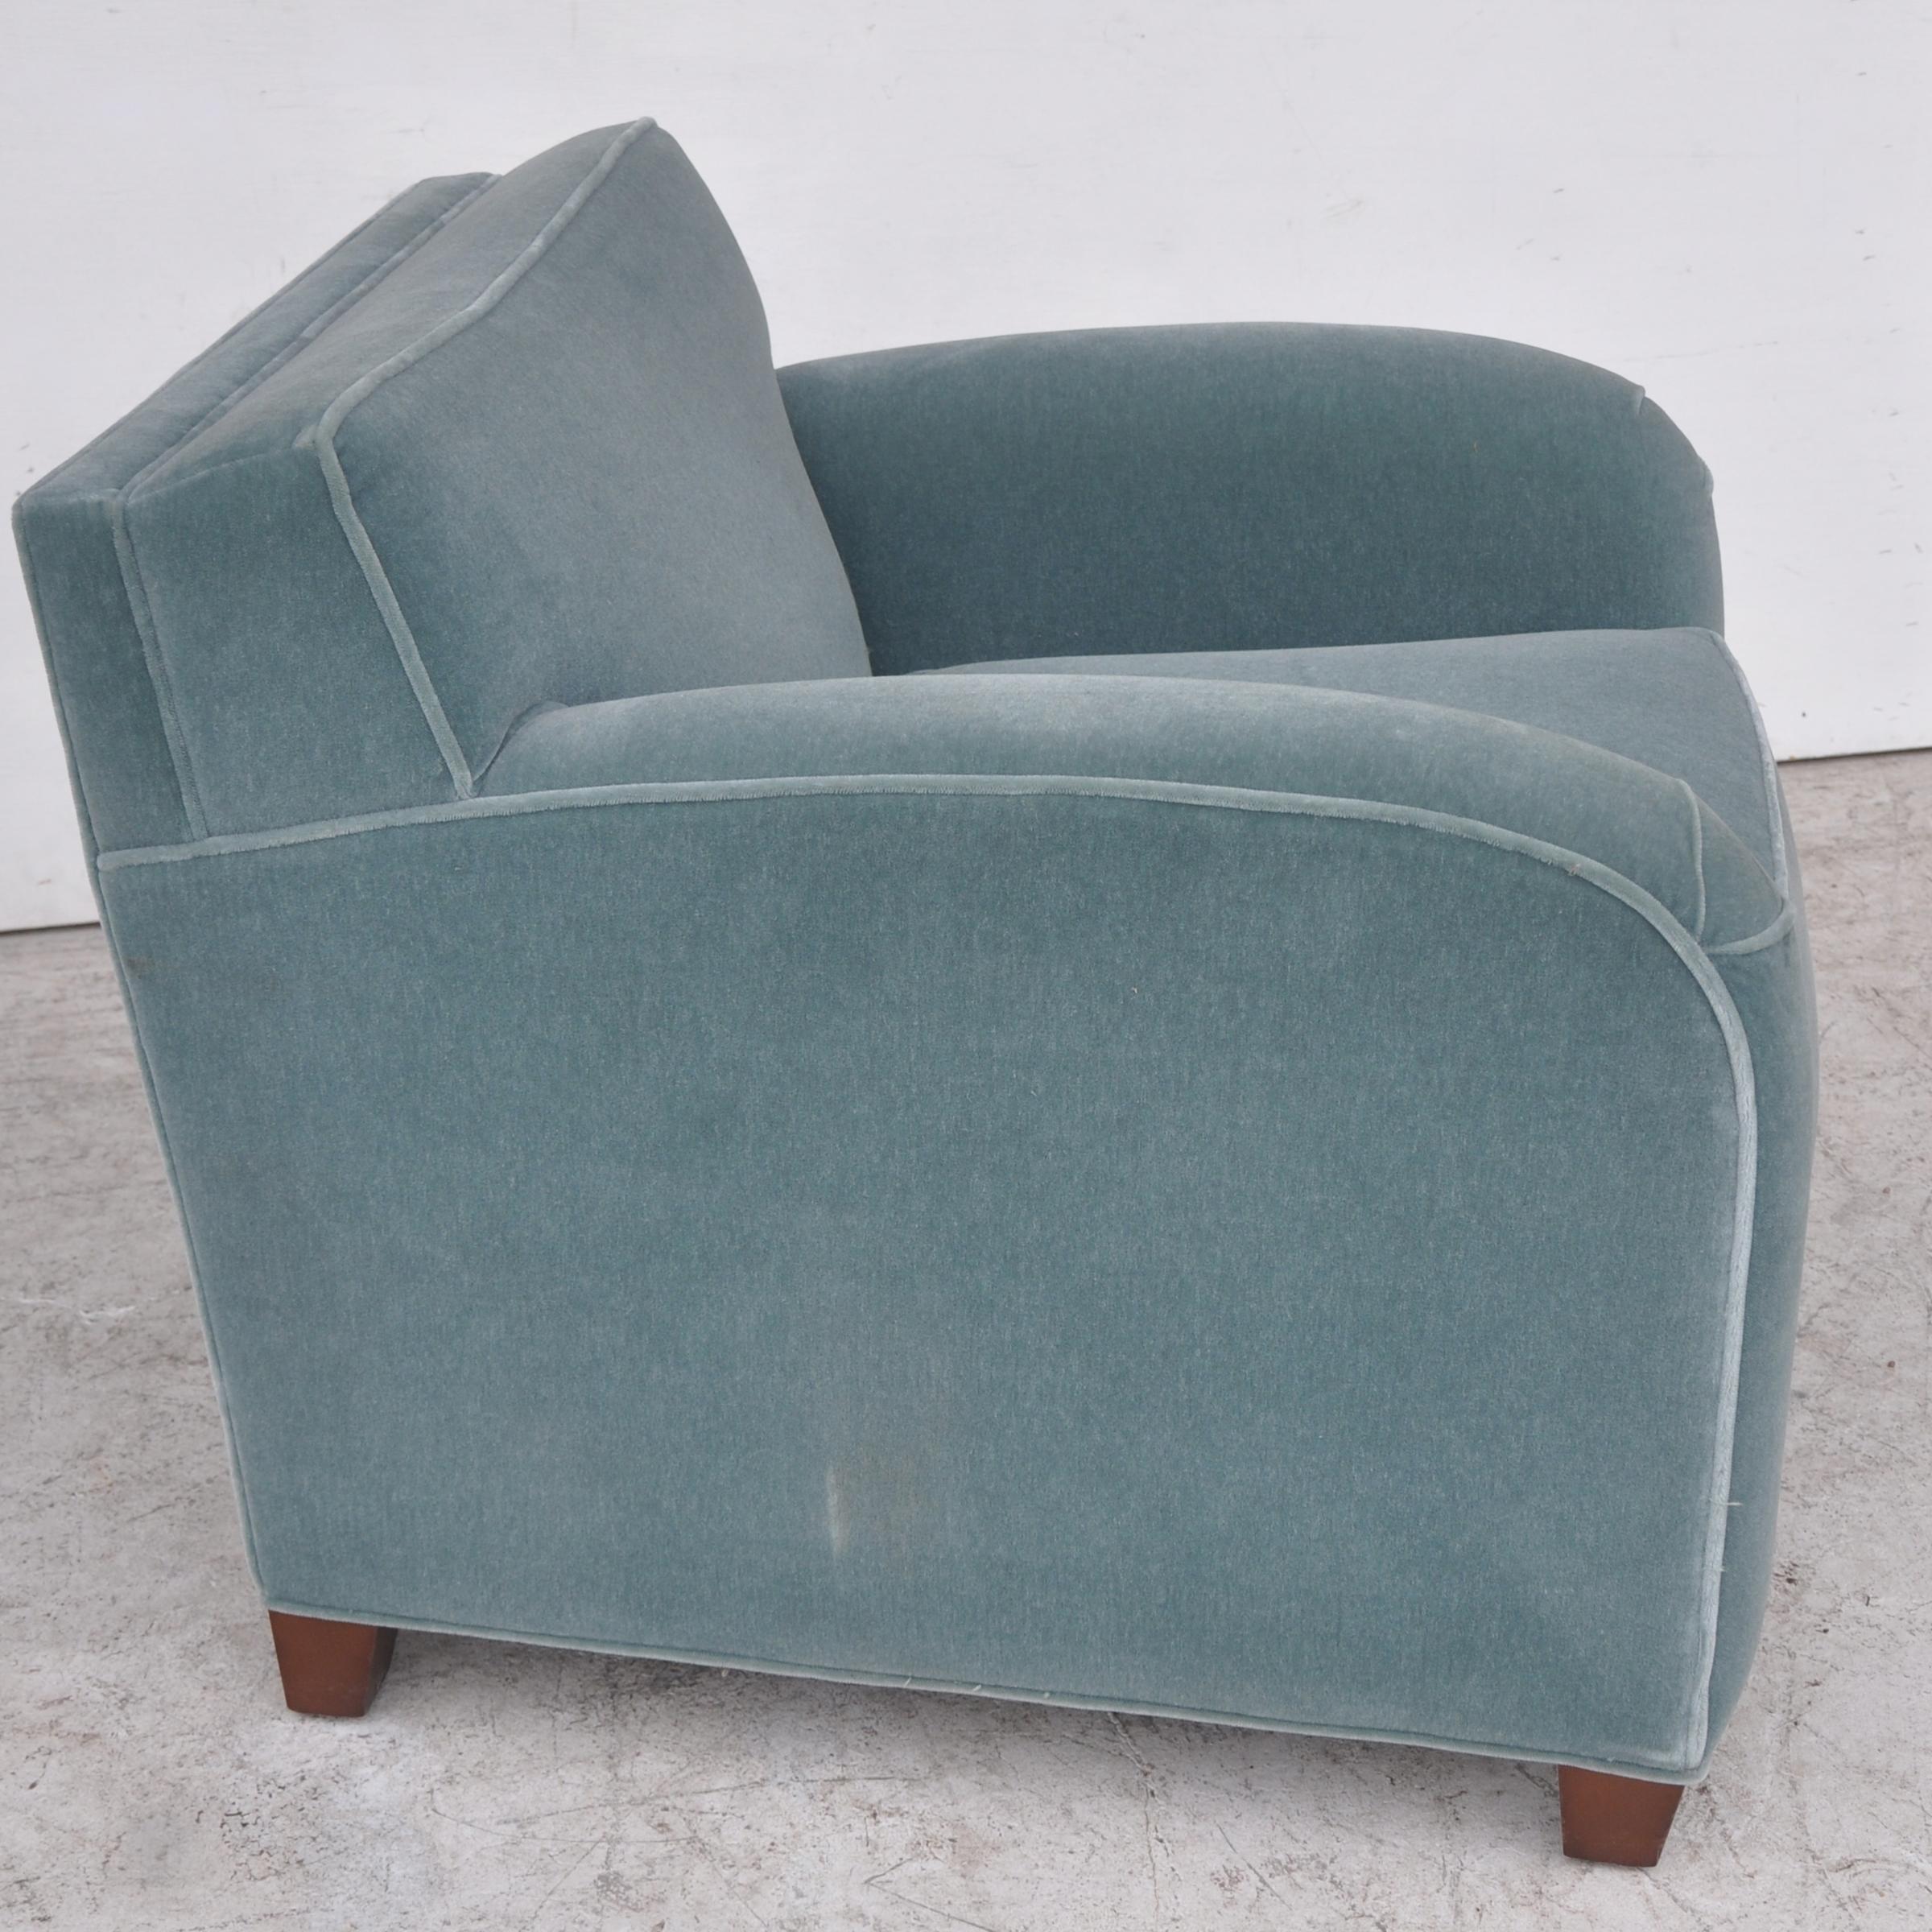 Pair of Martin Brattrud blue mohair lounge chairs
2011

Art Deco style club chairs in momentum Imperial blue mohair. Solid construction and very comfortable. Original label.

2 pairs available




Measurements: 28.5